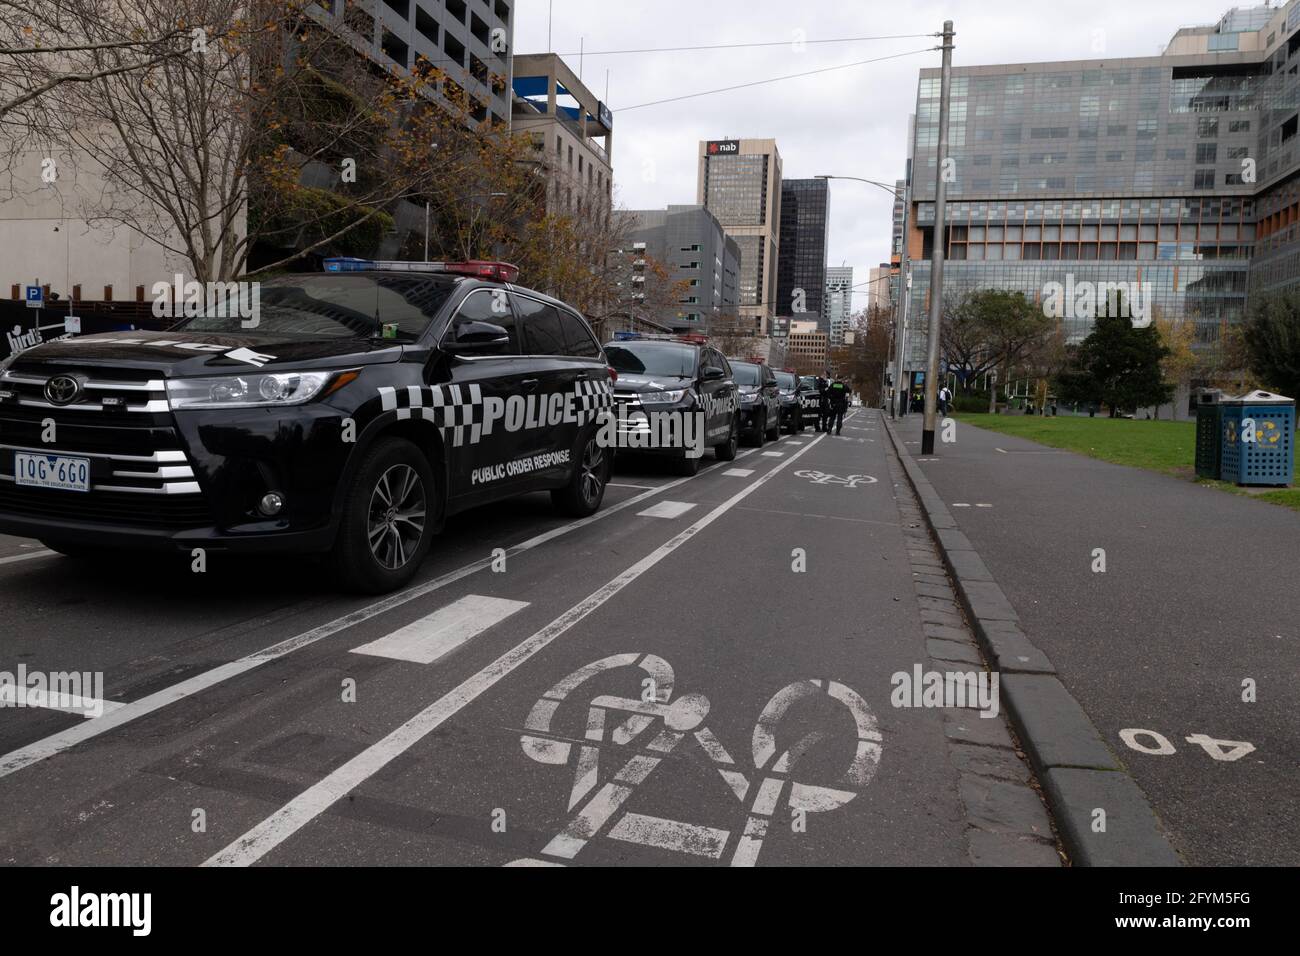 Melbourne, Australia 29 May 2021, Public order police cars on William Street during a planned 'Millions March' rally at Flagstaff Gardens, that had been canceled by organisers due to the snap lockdown. Hardcore anti-lockdown and anti-vaccination protesters still attend the park and rallied against the government. Credit: Michael Currie/Alamy Live News Stock Photo